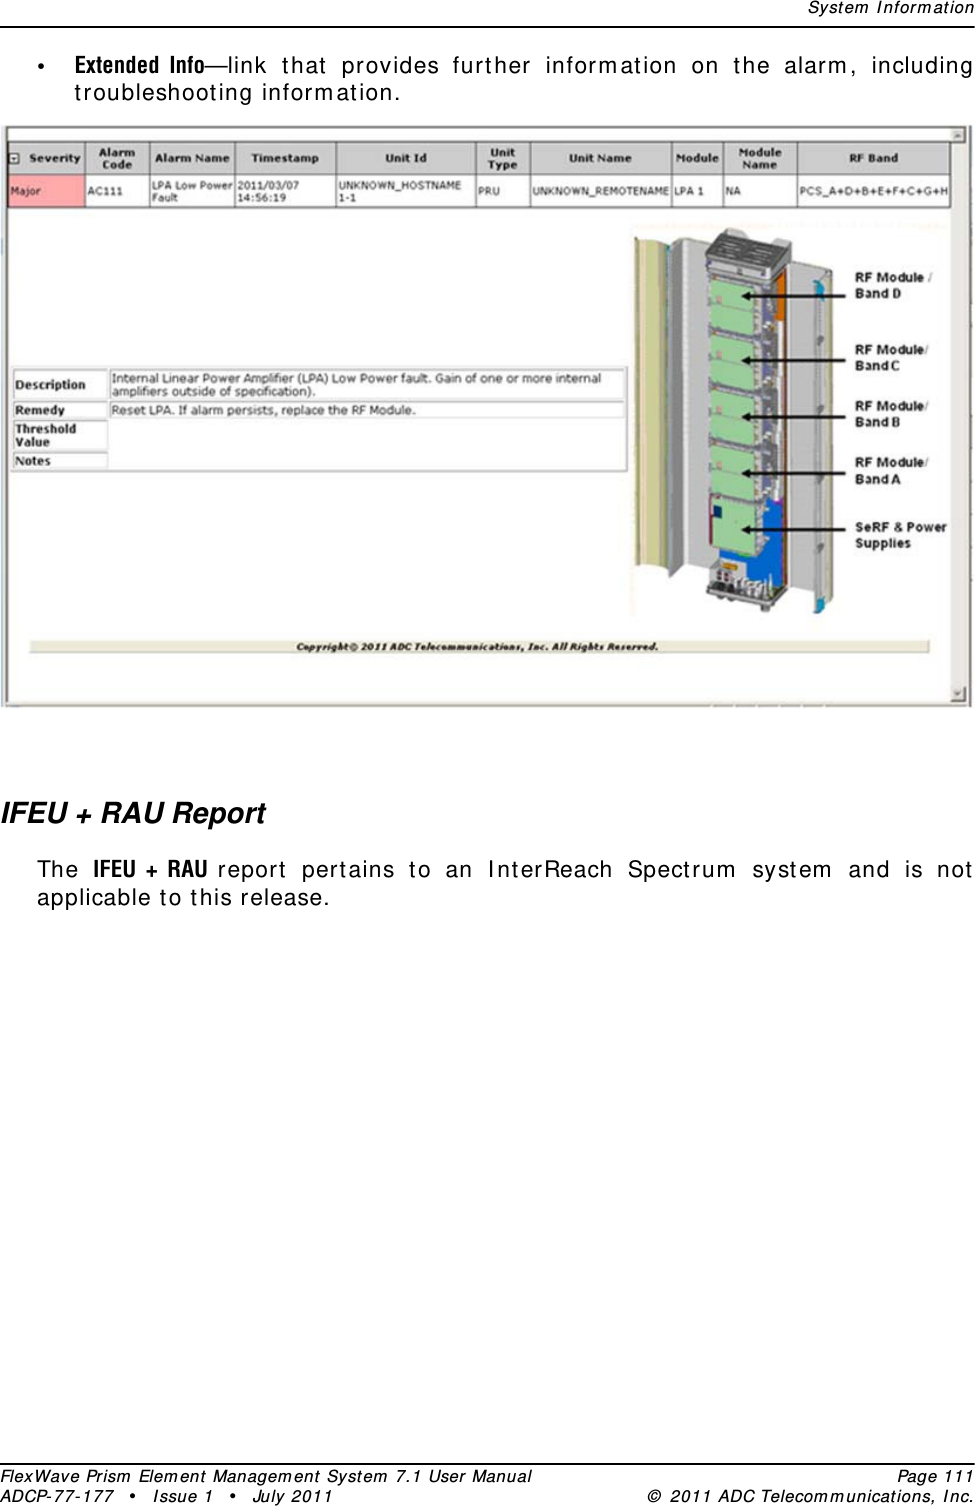 Syst em  I nform at ionFlexWave Prism  Elem ent Managem ent  Syst em  7.1 User Manual Page 111ADCP- 77- 177  • I ssue 1 • July 2011 ©  2011 ADC Telecom m unicat ions, I nc.•Extended Info—link t hat  provides furt her inform at ion on the alarm , including troubleshoot ing inform at ion.IFEU + RAU ReportThe  IFEU + RAU report  pert ains t o an I nt erReach Spectrum  system  and is not applicable t o t his release.